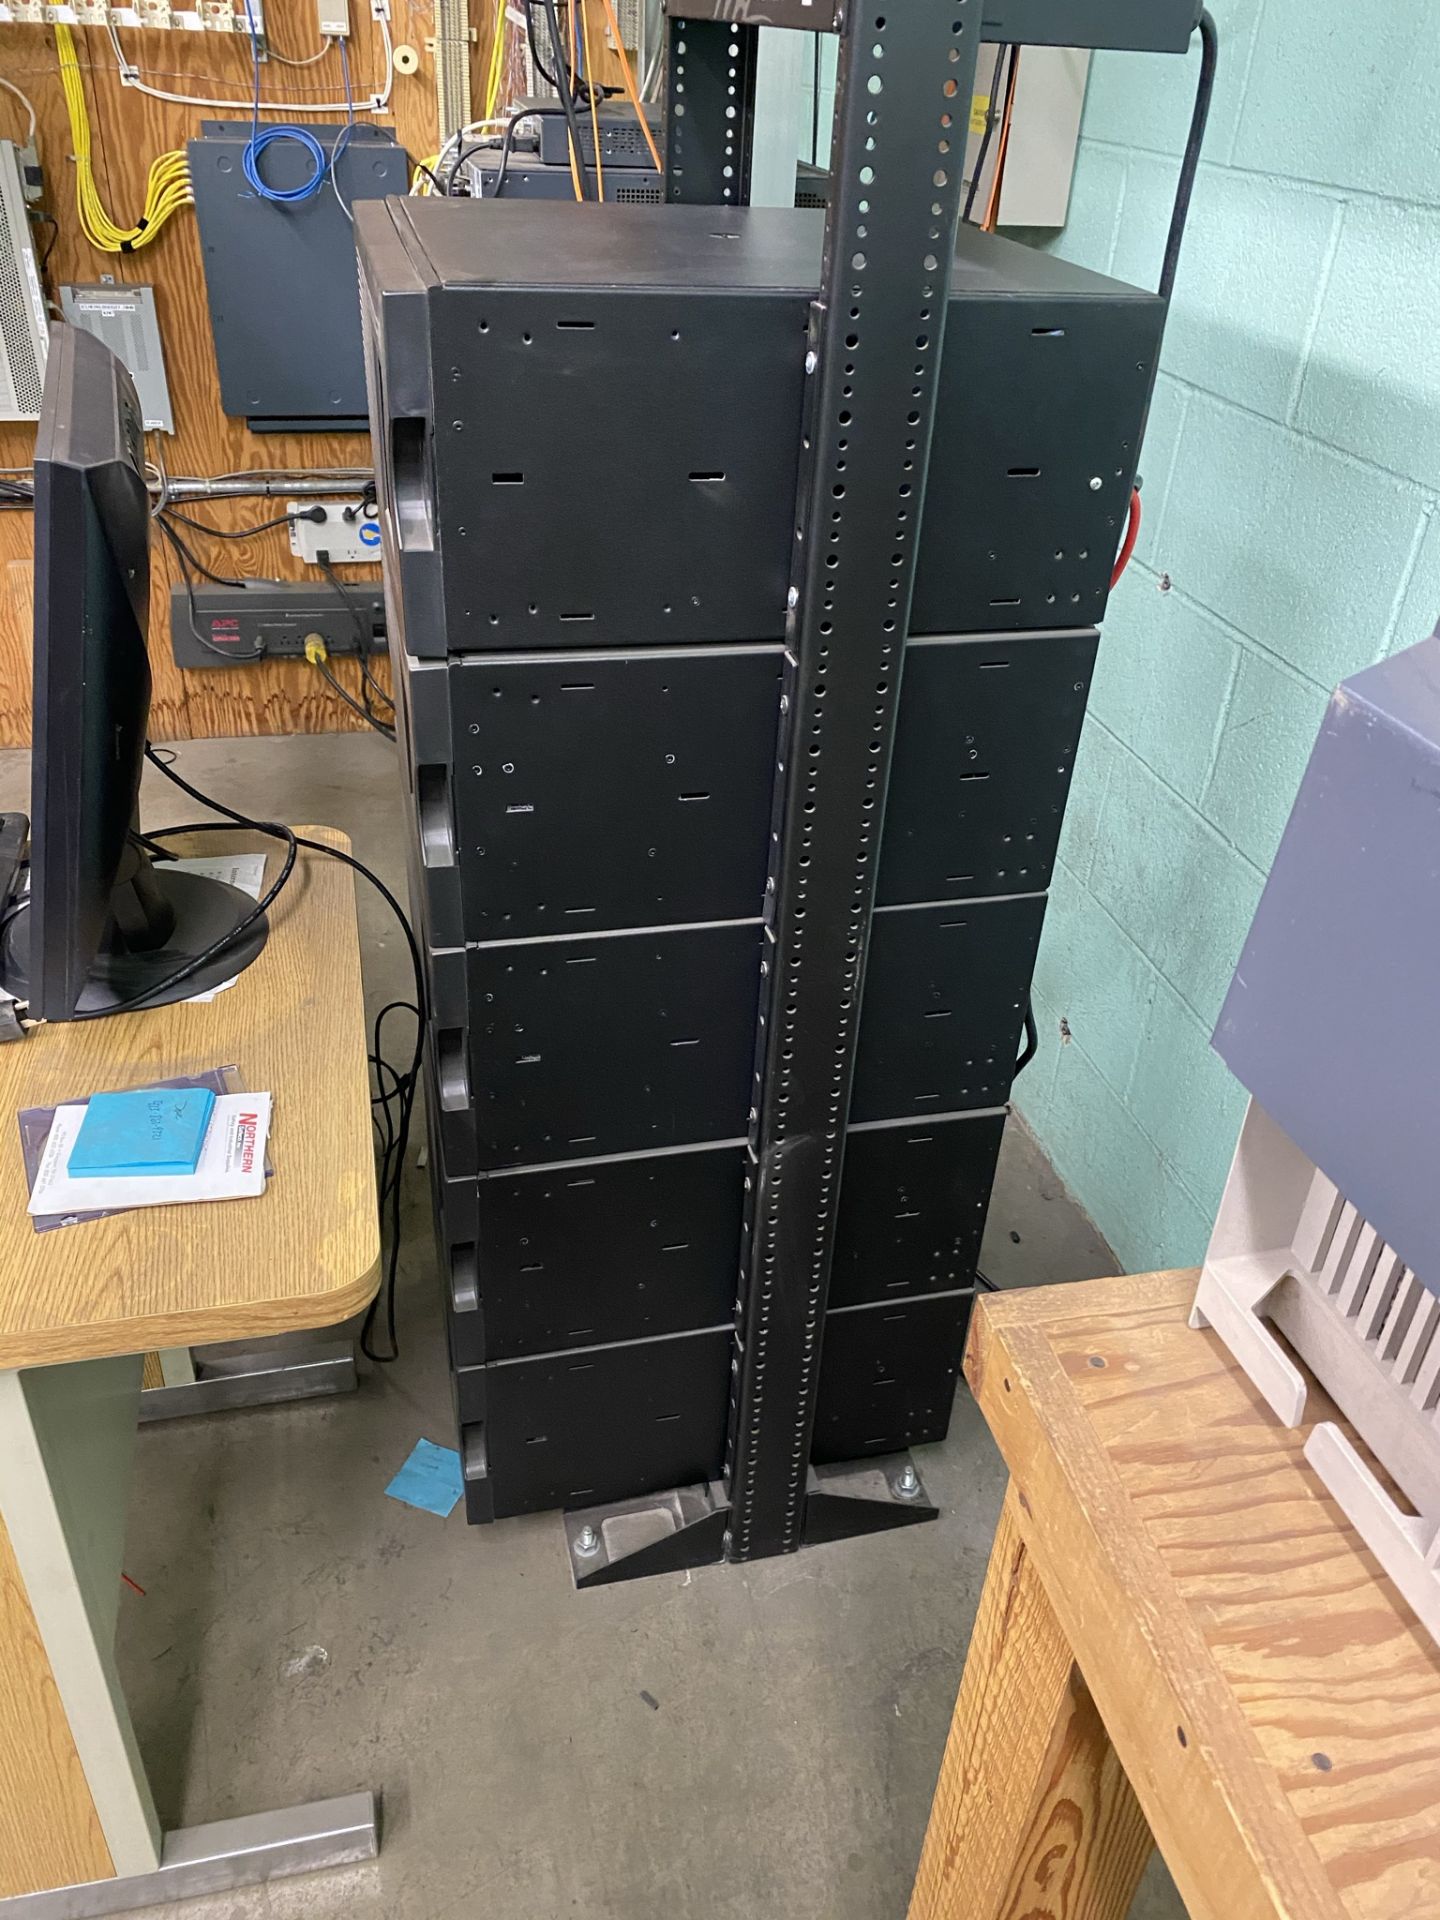 APC Smart-UPS 3000XL Uninterruptable Power Supply Stack with Rack [Loc: Church Hill, TN] - Image 3 of 4